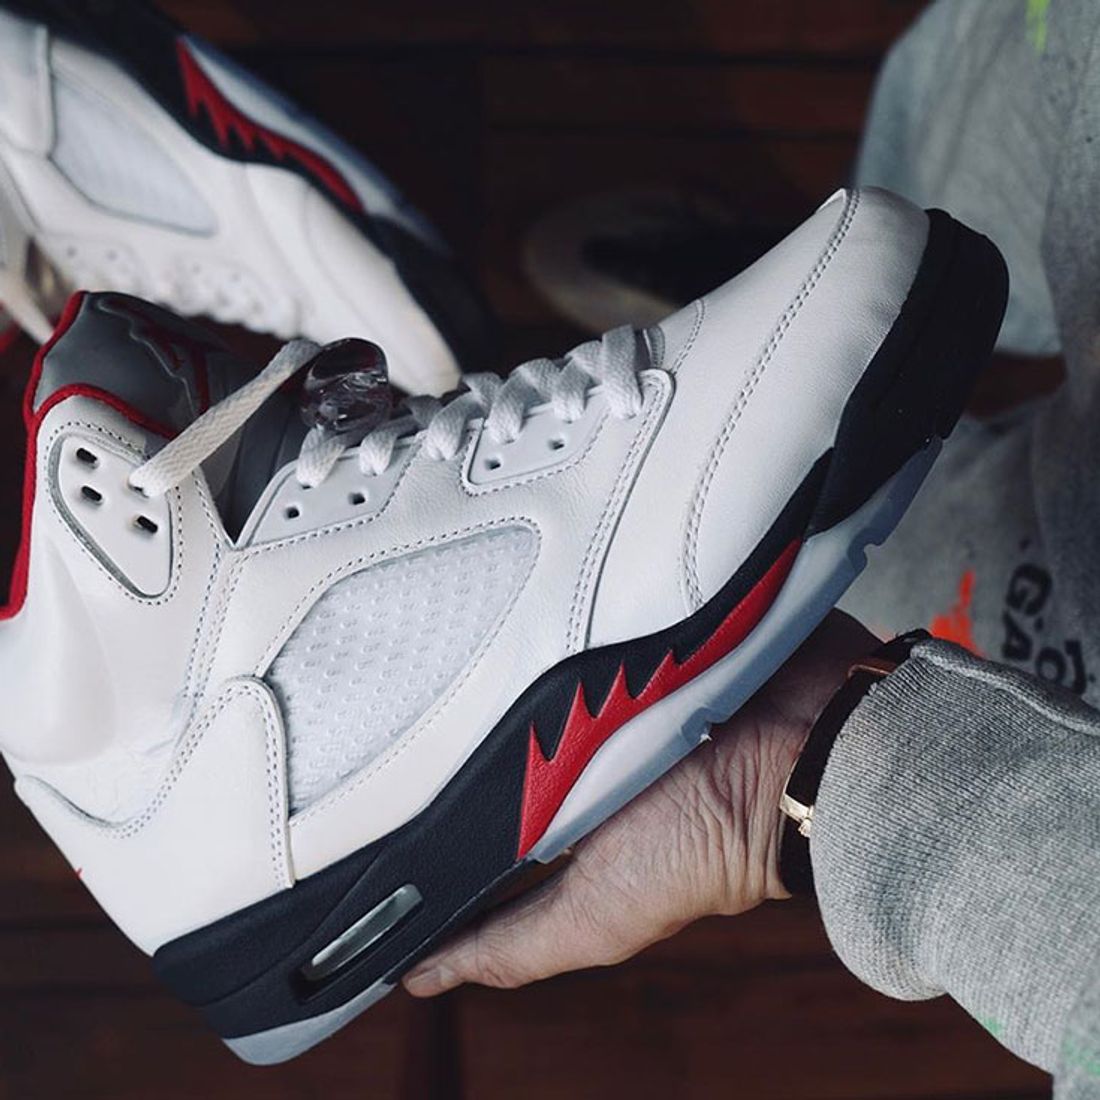 Nike x Off-White Air Jordan 5 Fire Red/Sail Unboxing + On-Foot Look!!! 